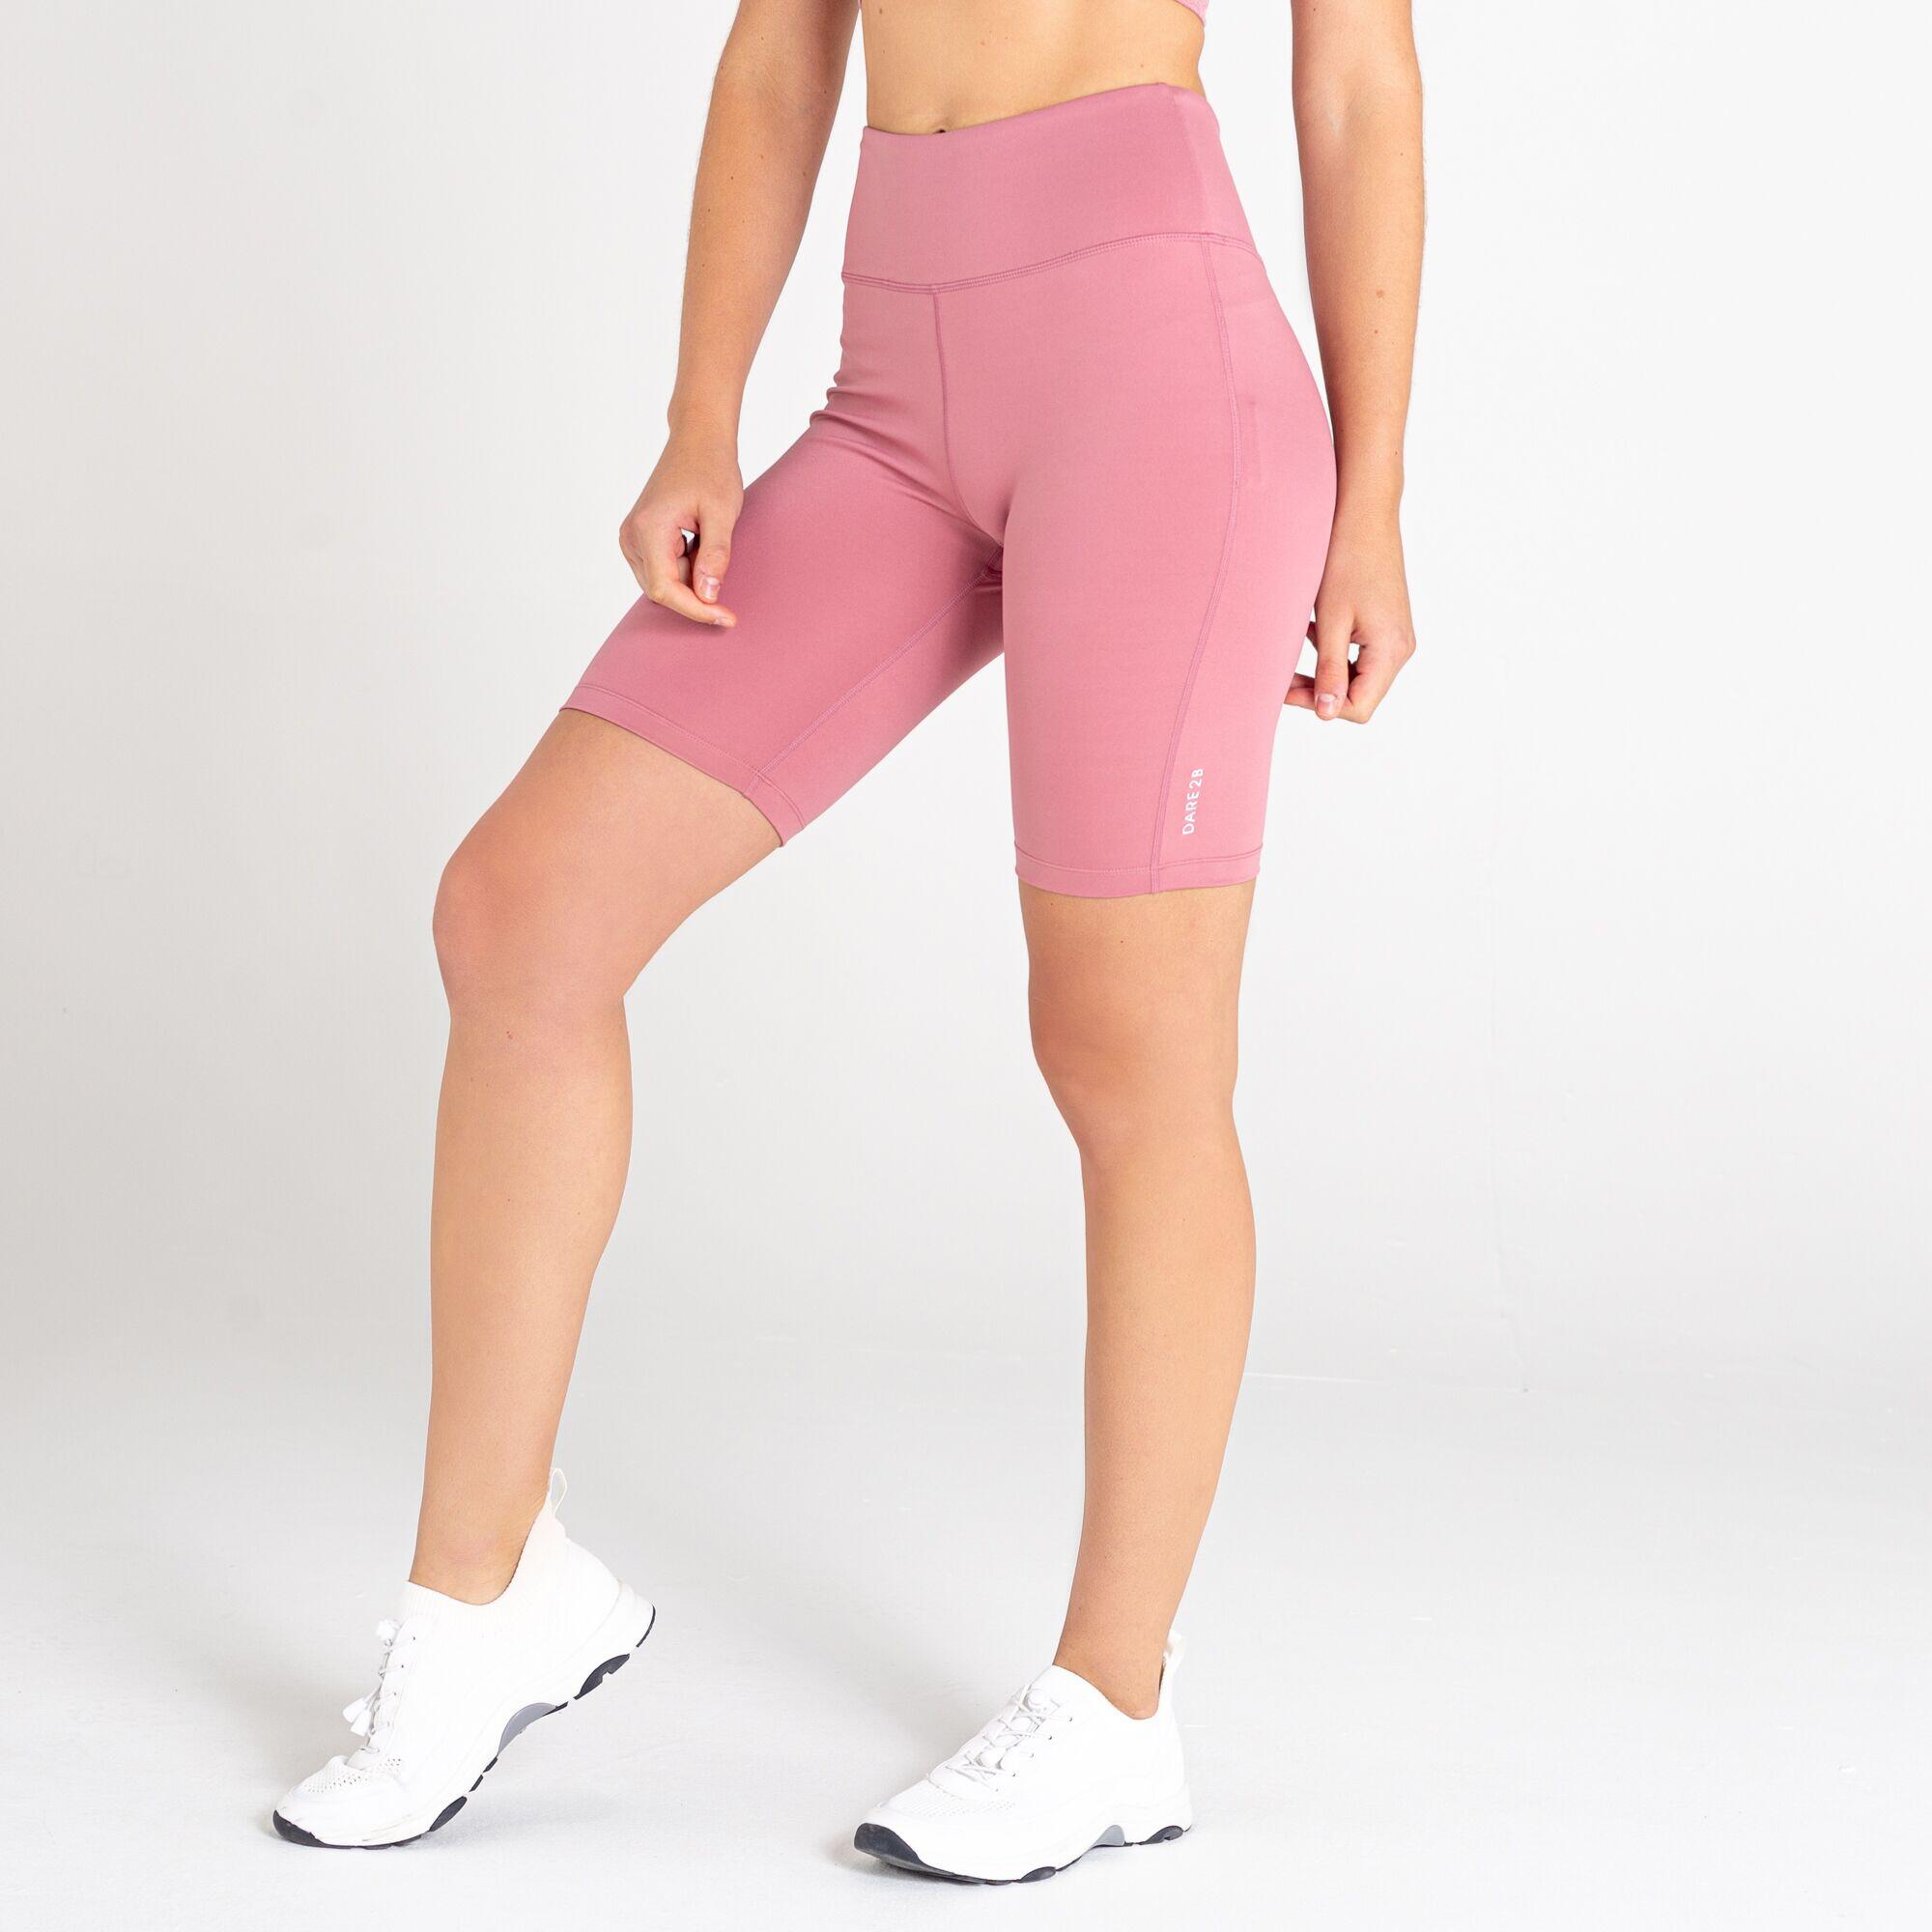 Lounge About Women's Fitness Cropped Leggings - Light Pink 2/5